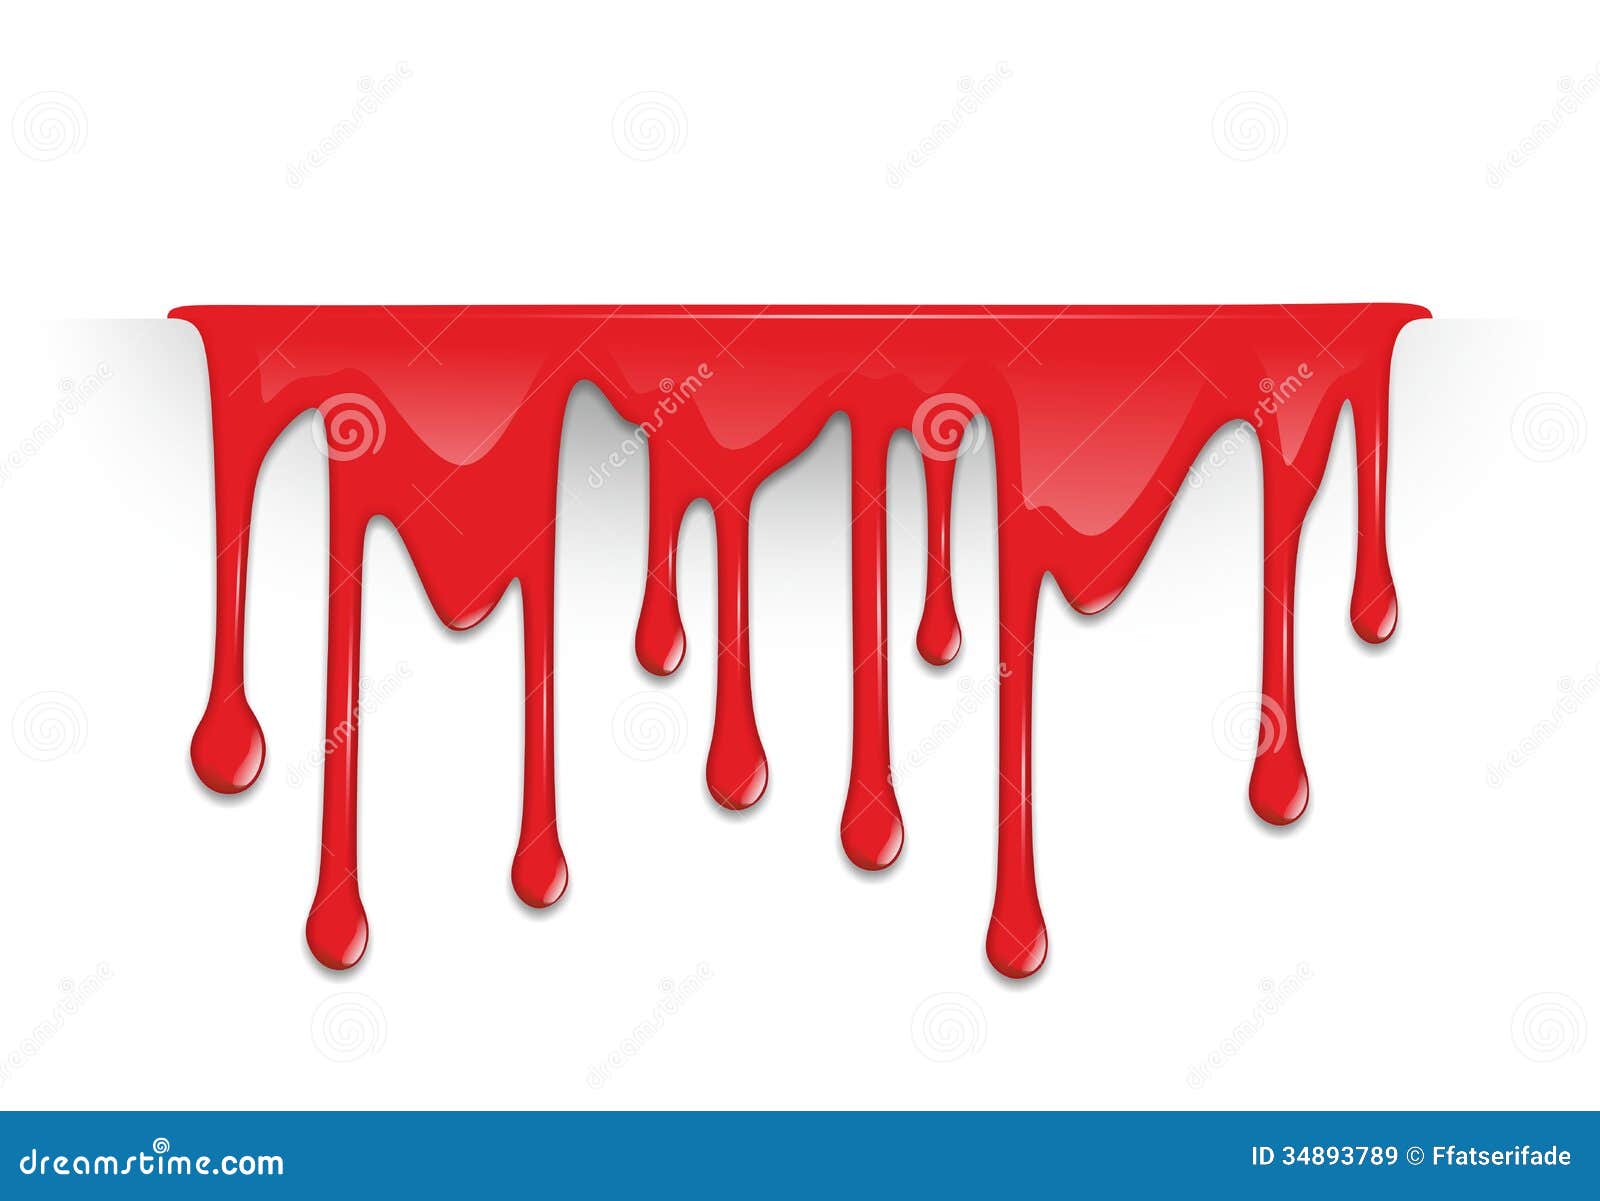 clipart of blood dripping - photo #33